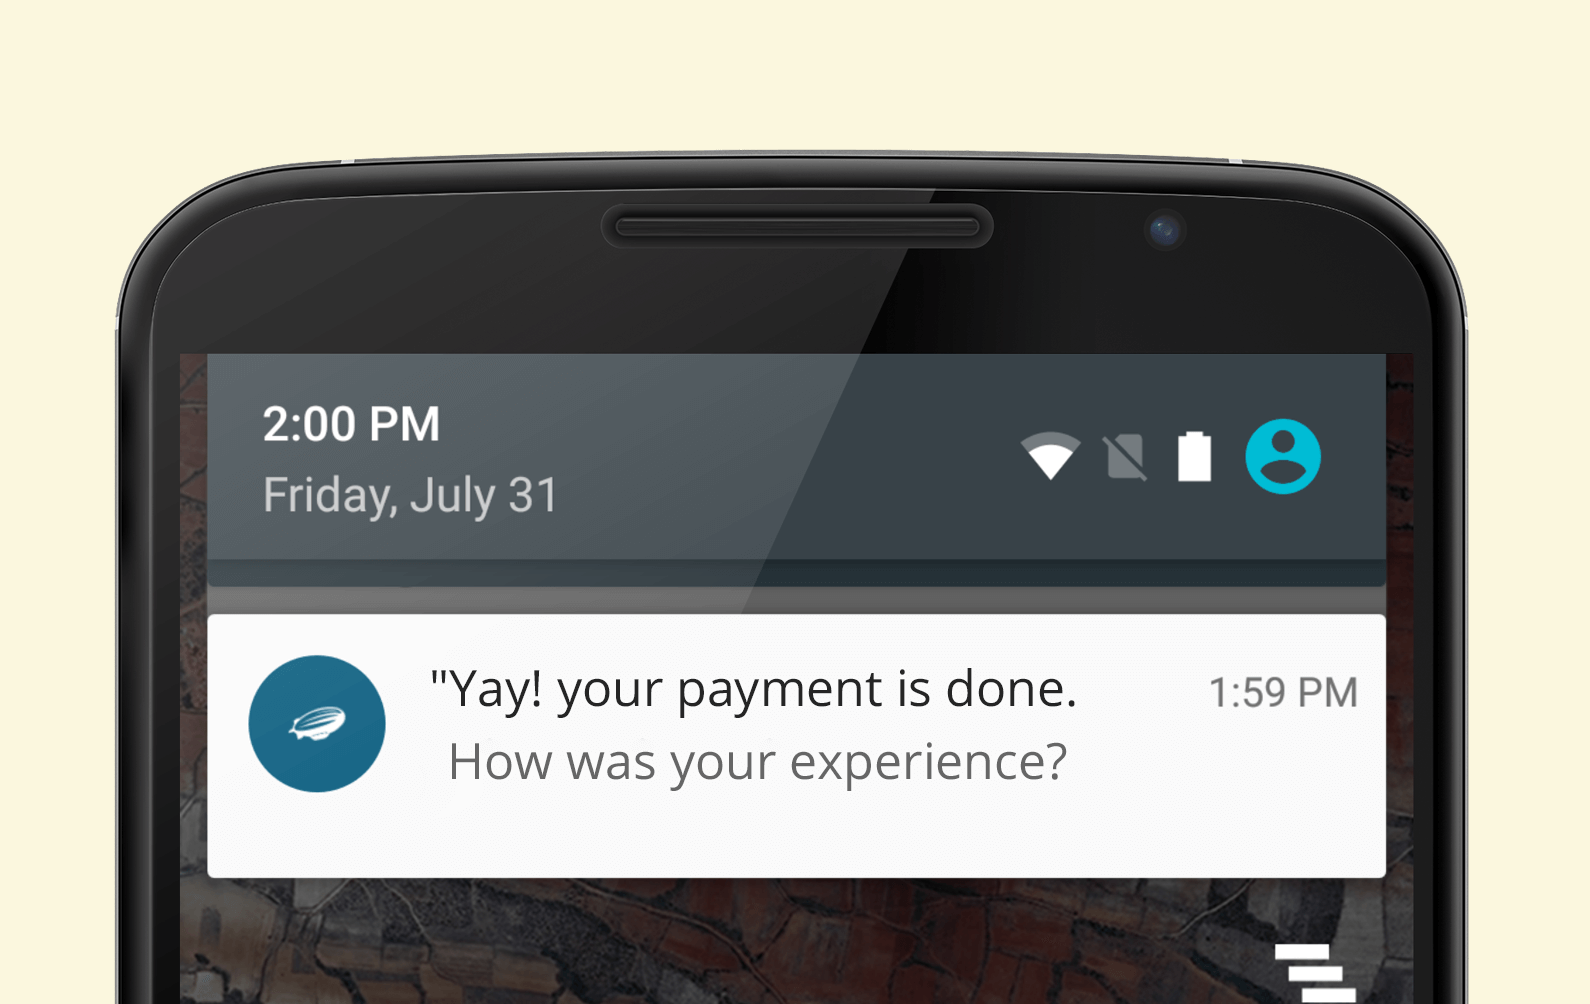 Payment confirmation through push notification android